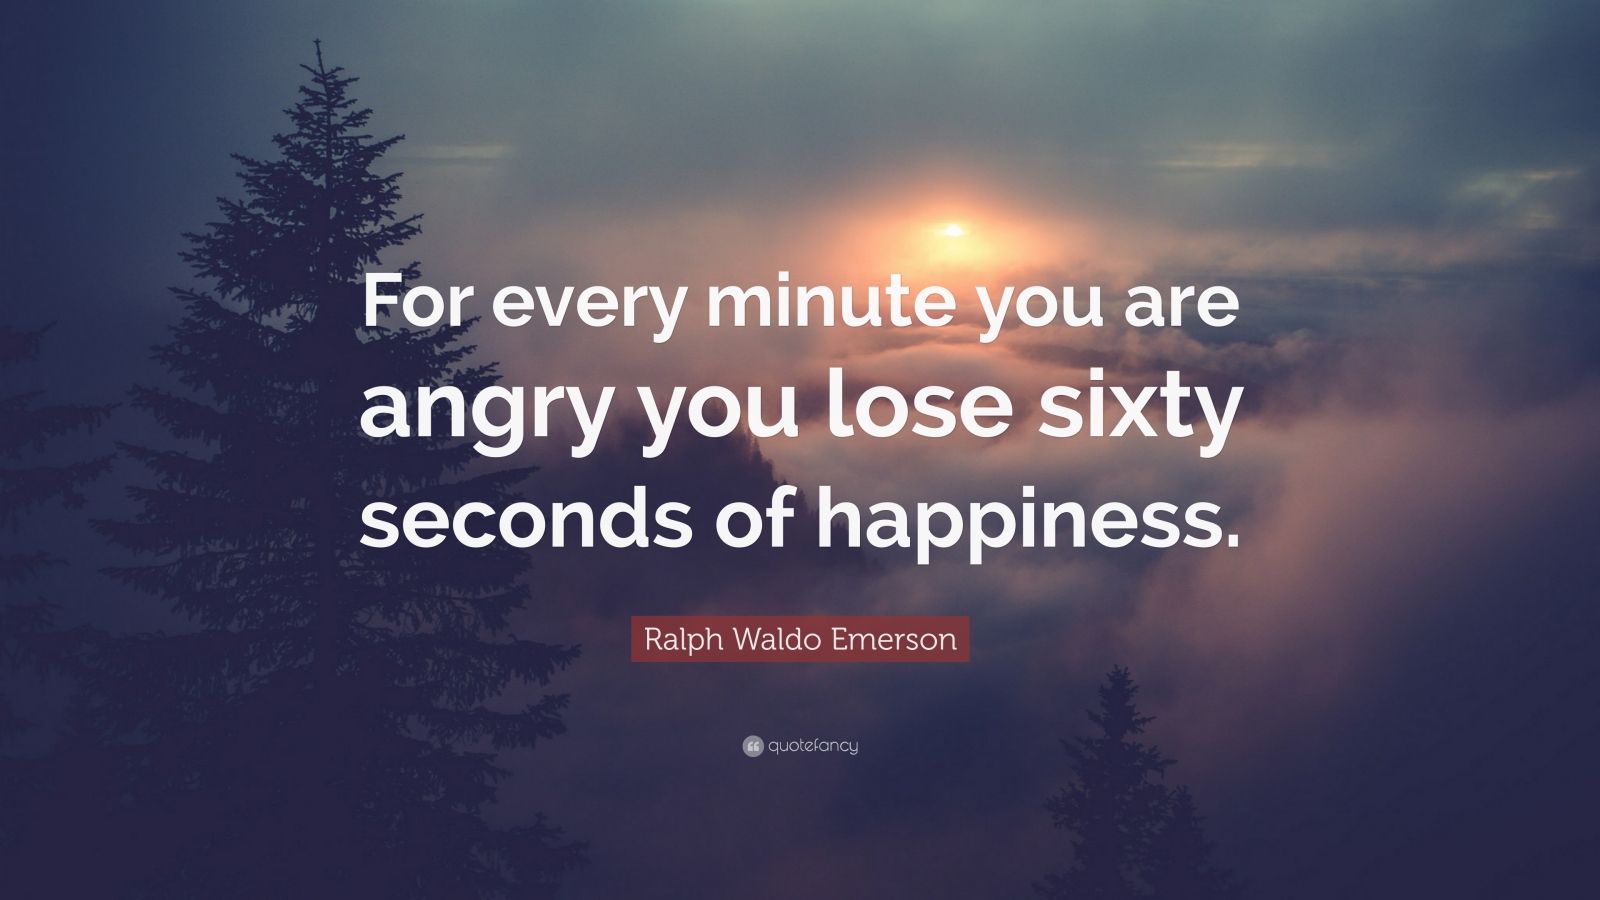 Ralph Waldo Emerson Quote “For every minute you are angry